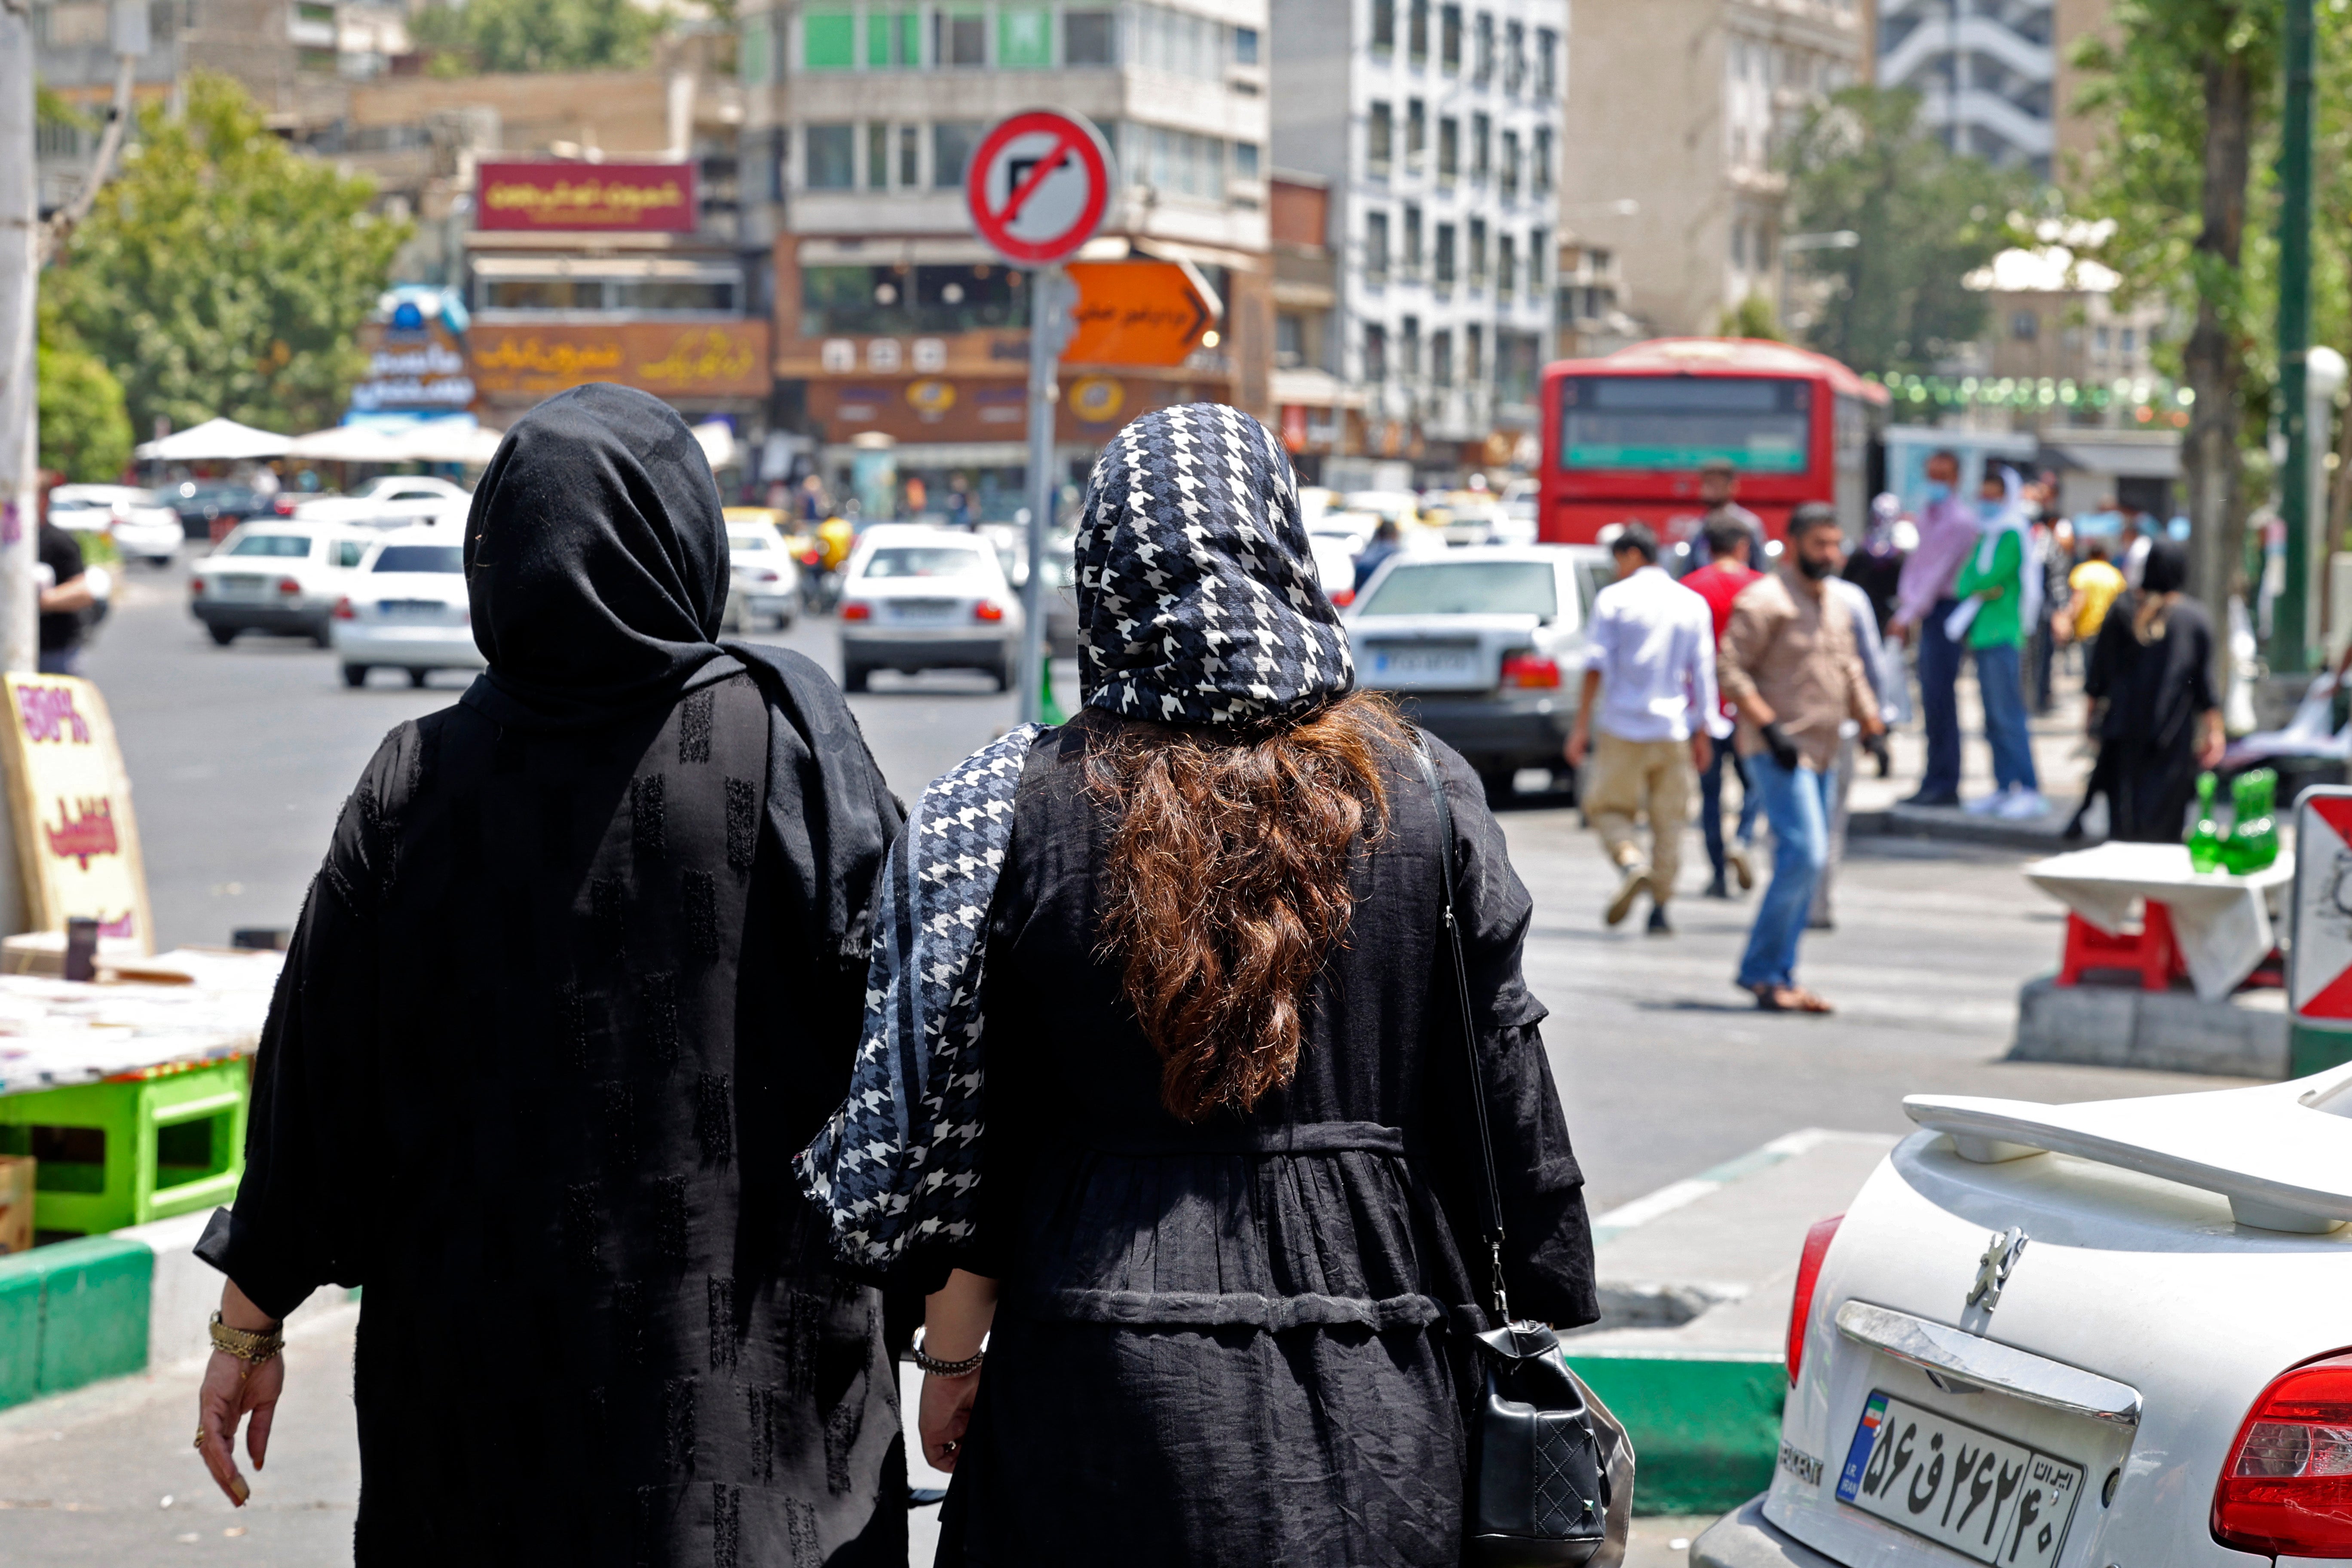 Iranian ‘morality police’ have been cracking down on women not wearing headscarves